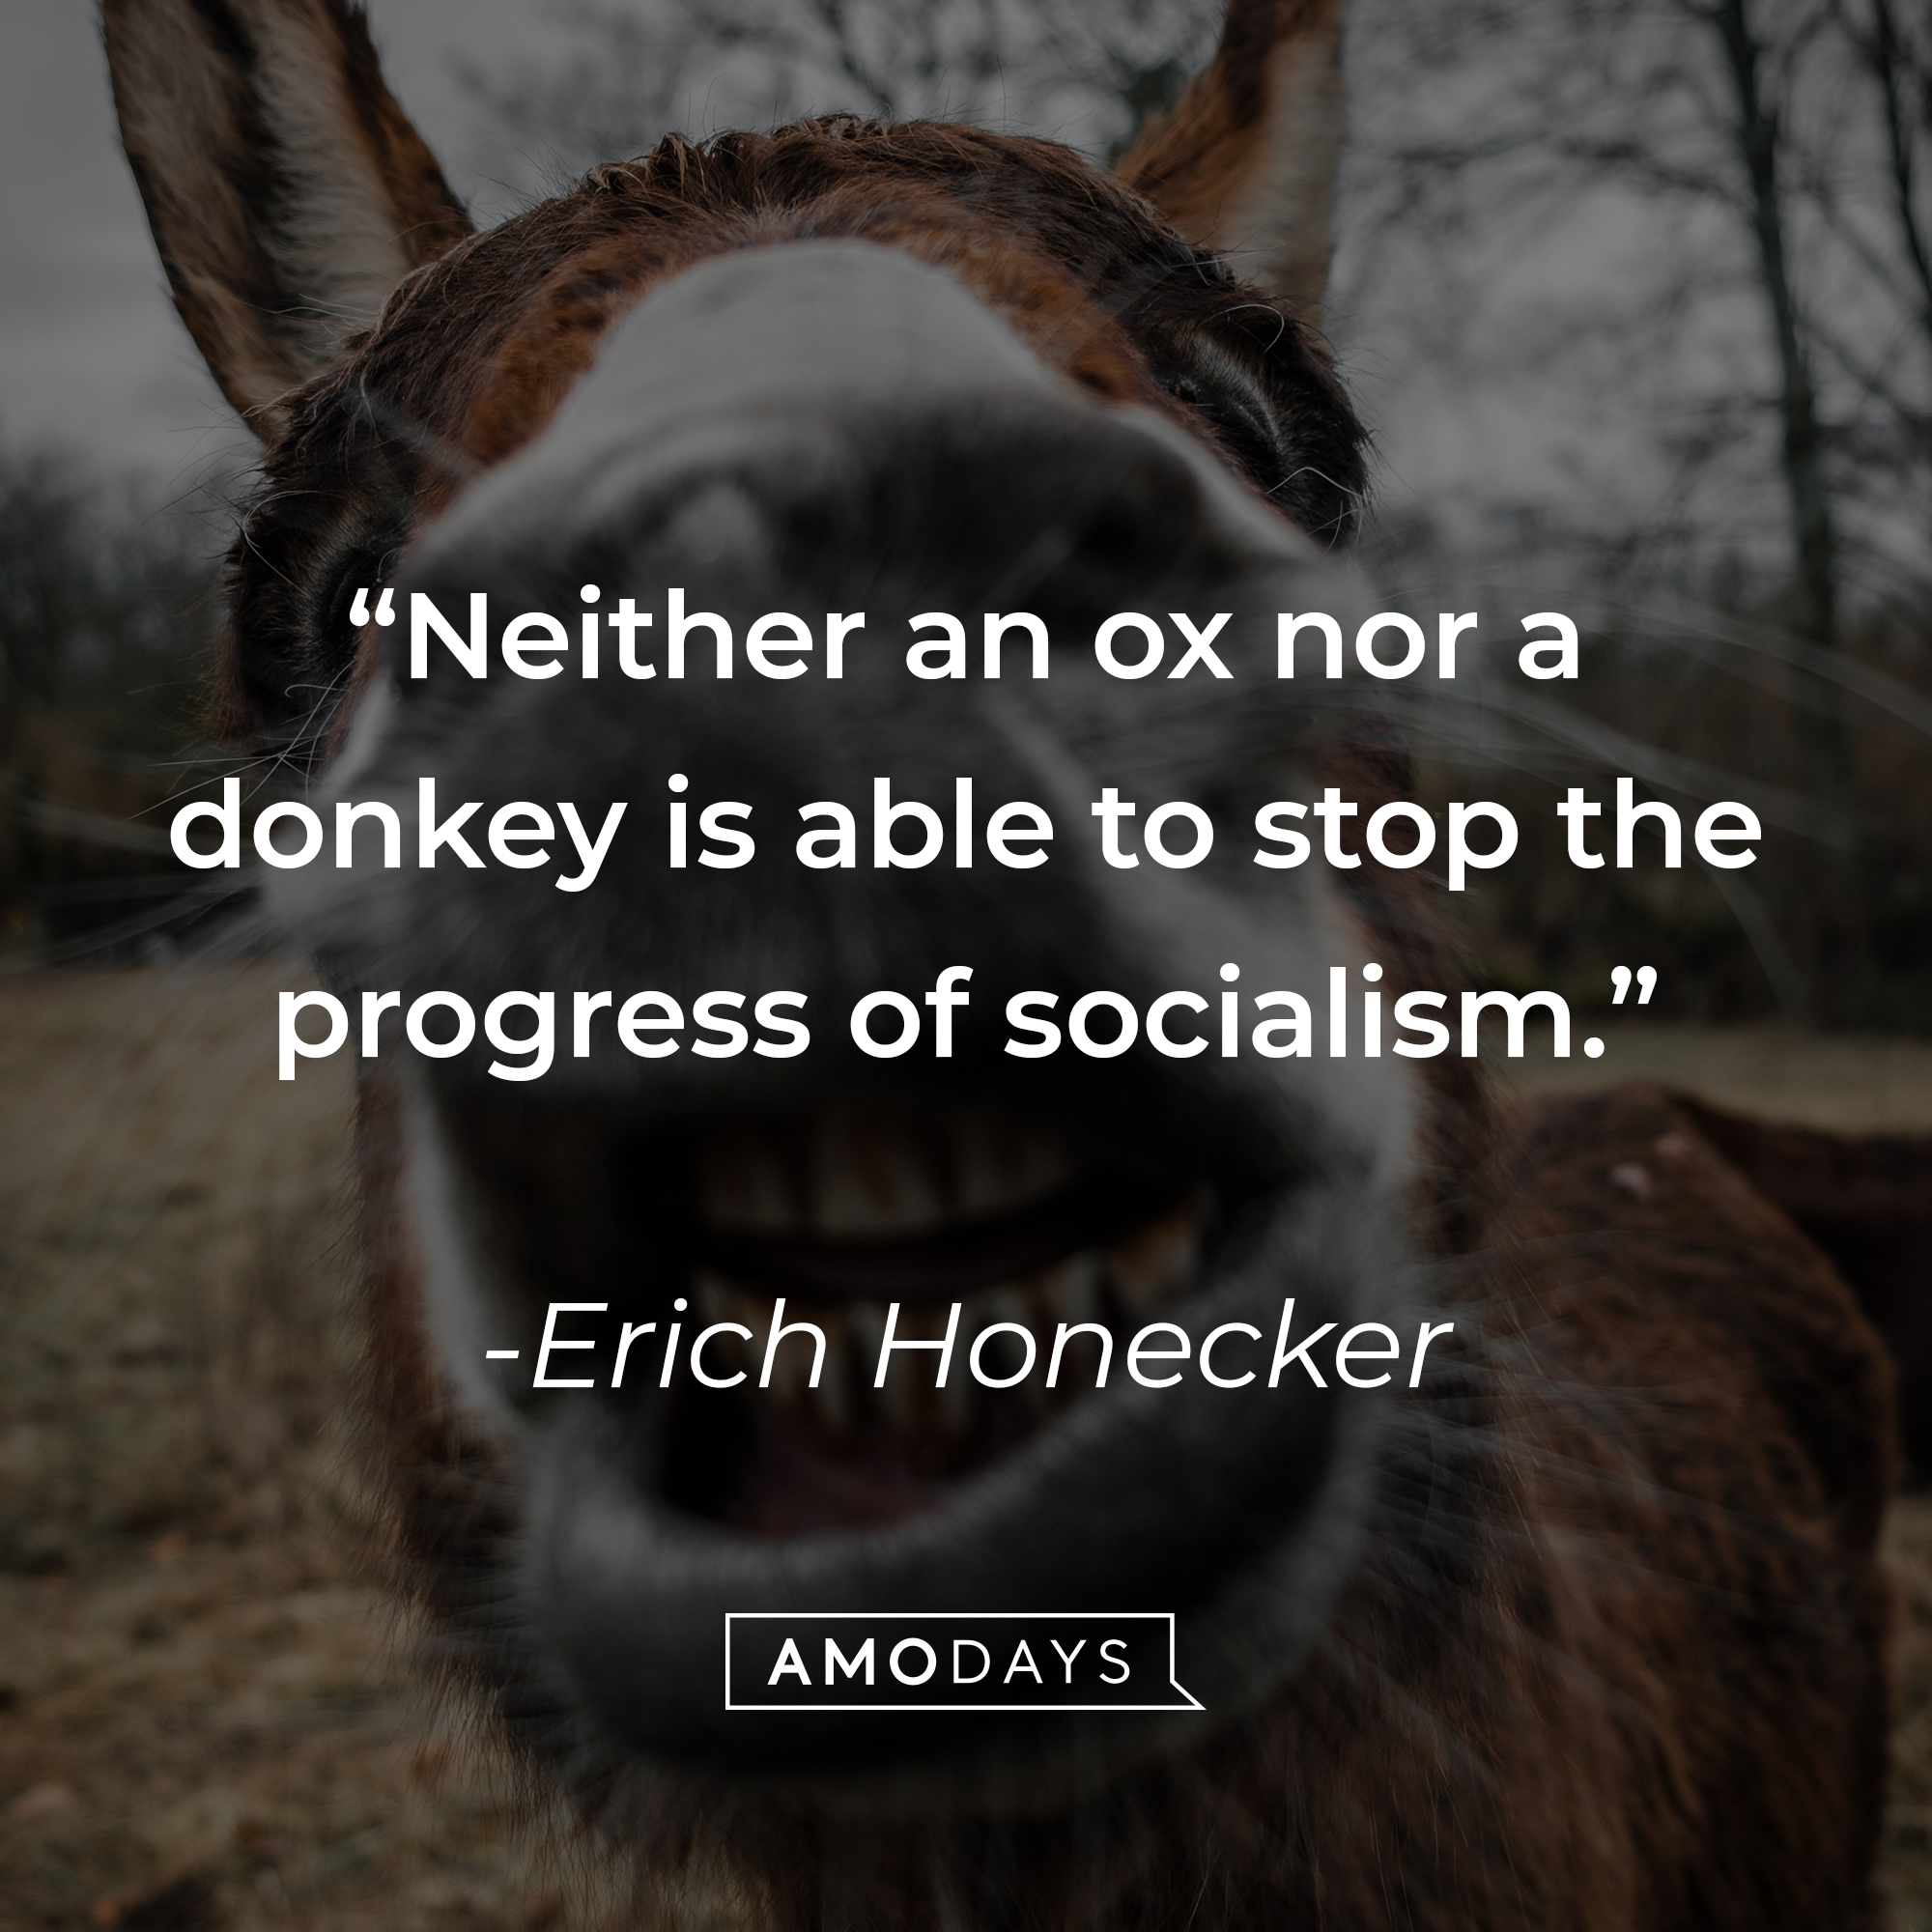 Erich Honecker's quote: "Neither an ox nor a donkey is able to stop the progress of socialism." | Source: Unsplash